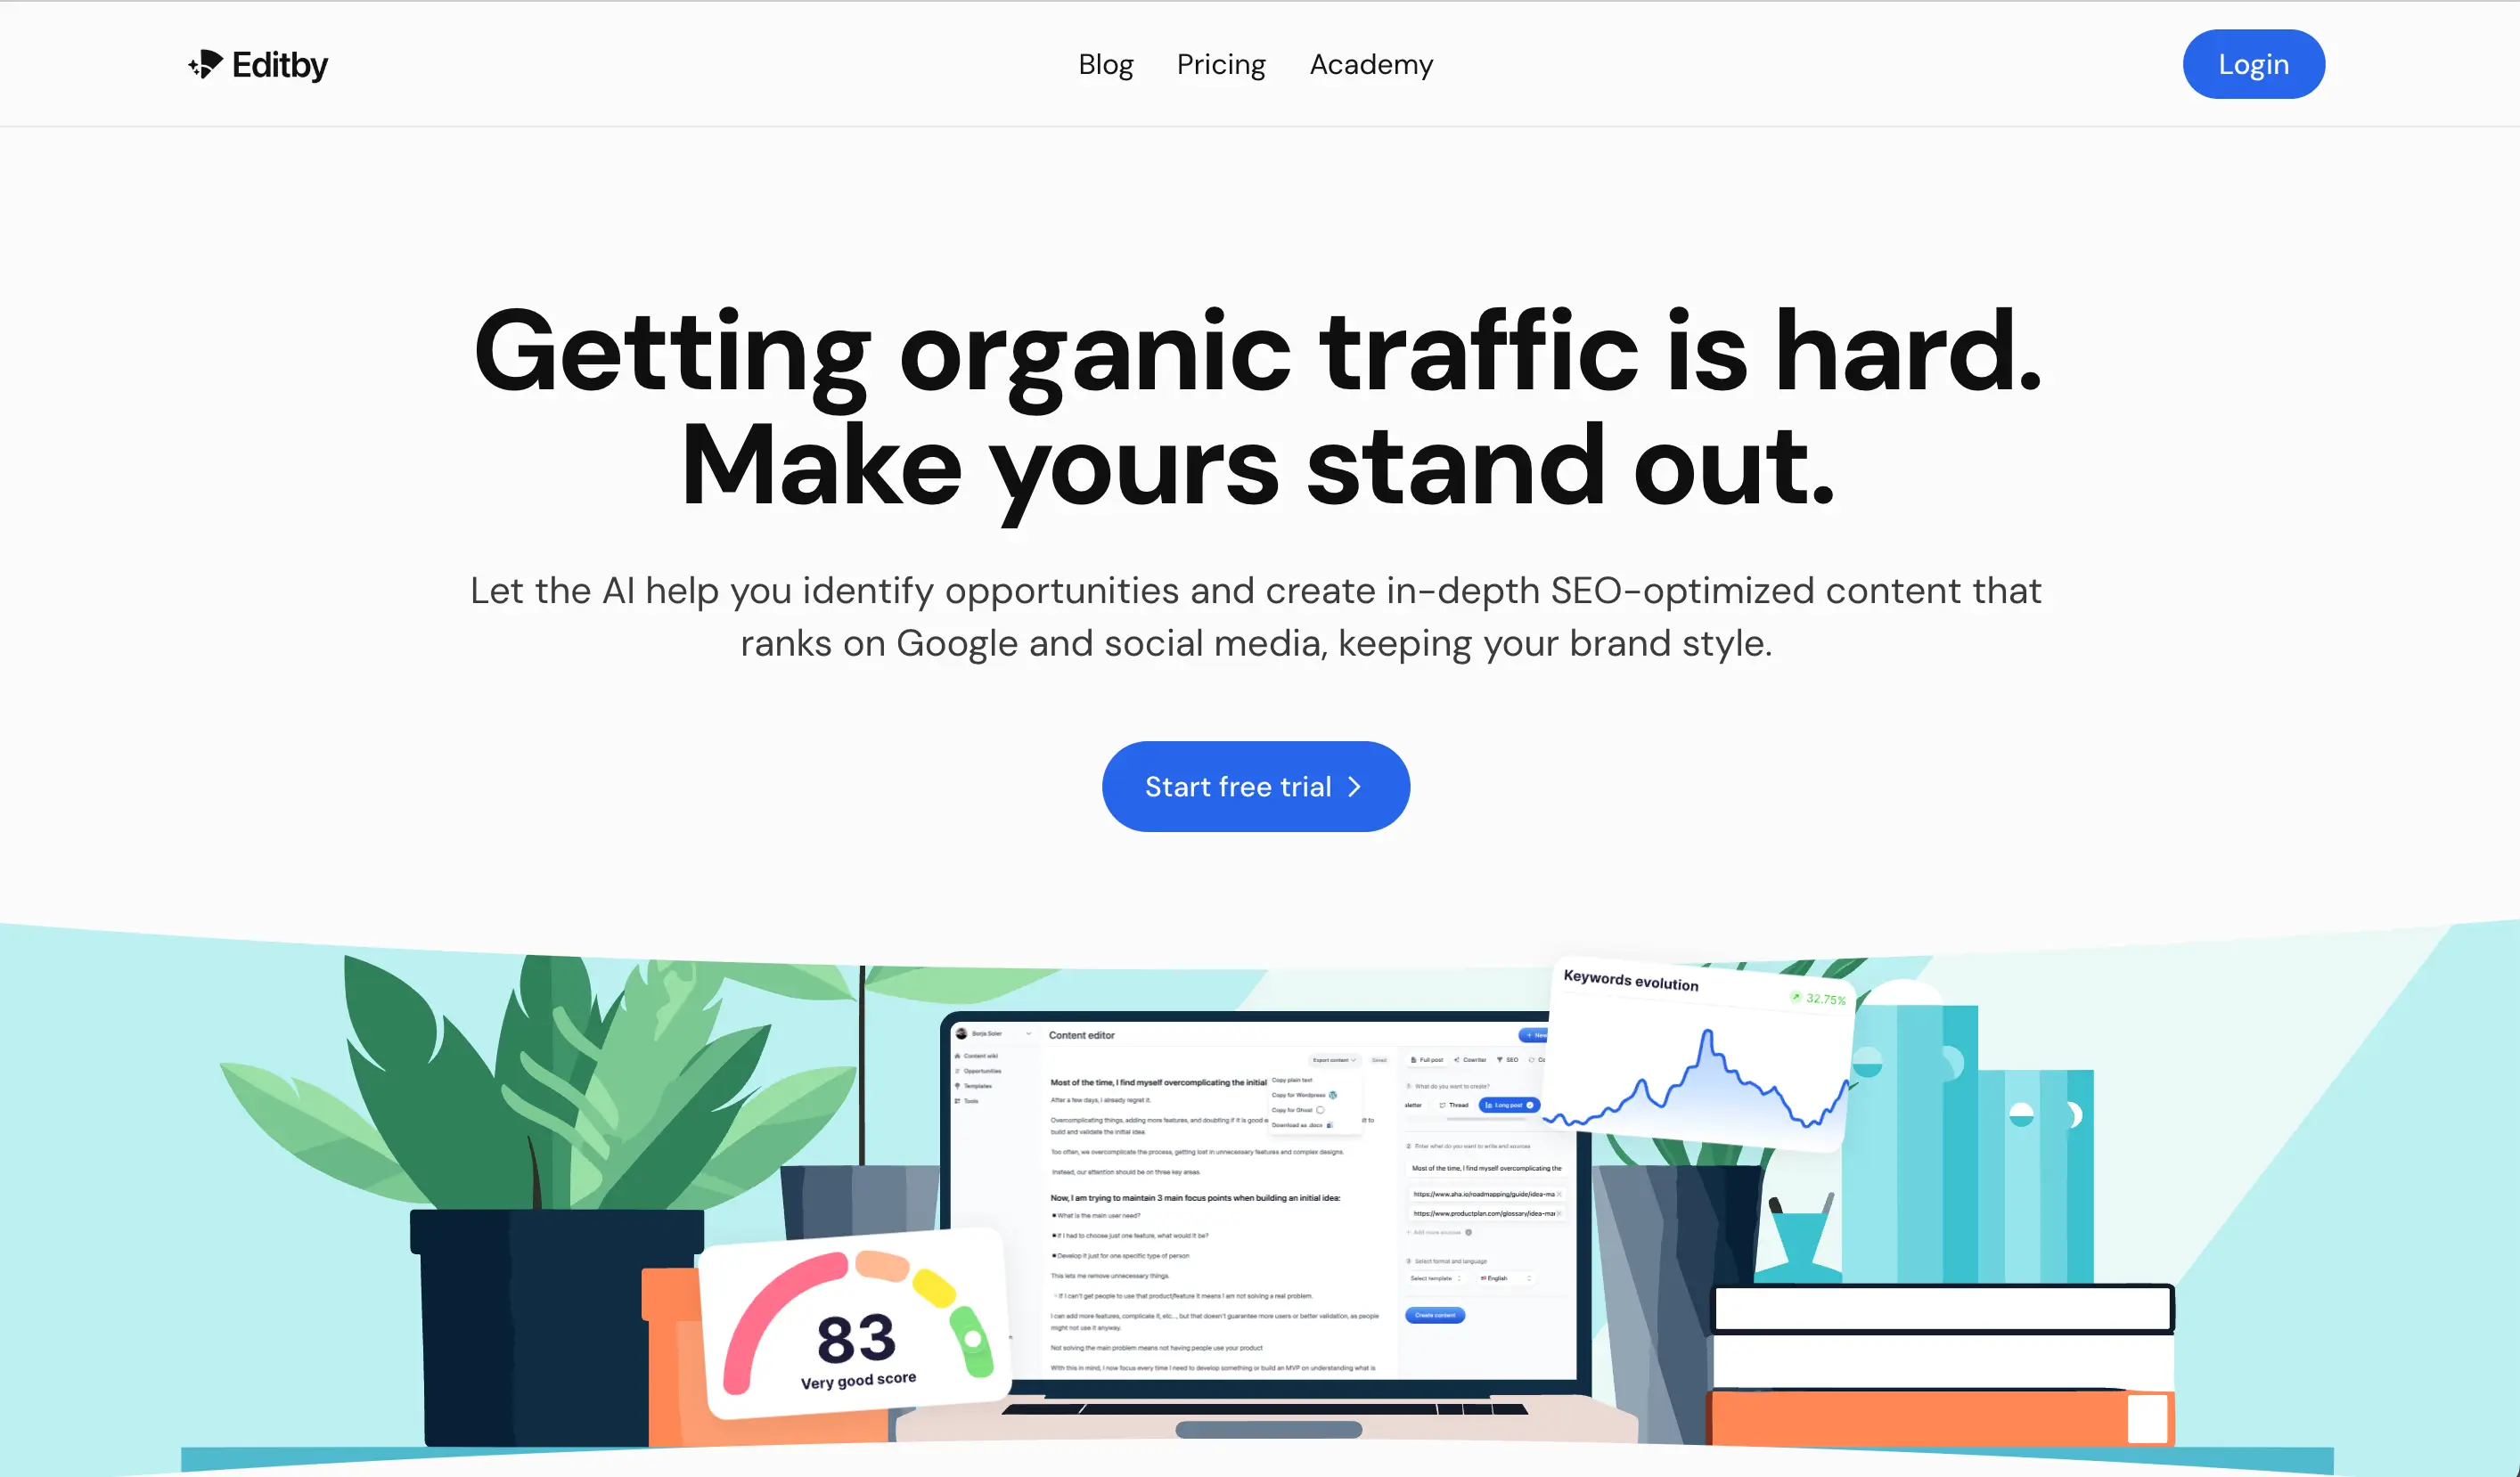 Getting organic traffic is hard. Make yours stand out